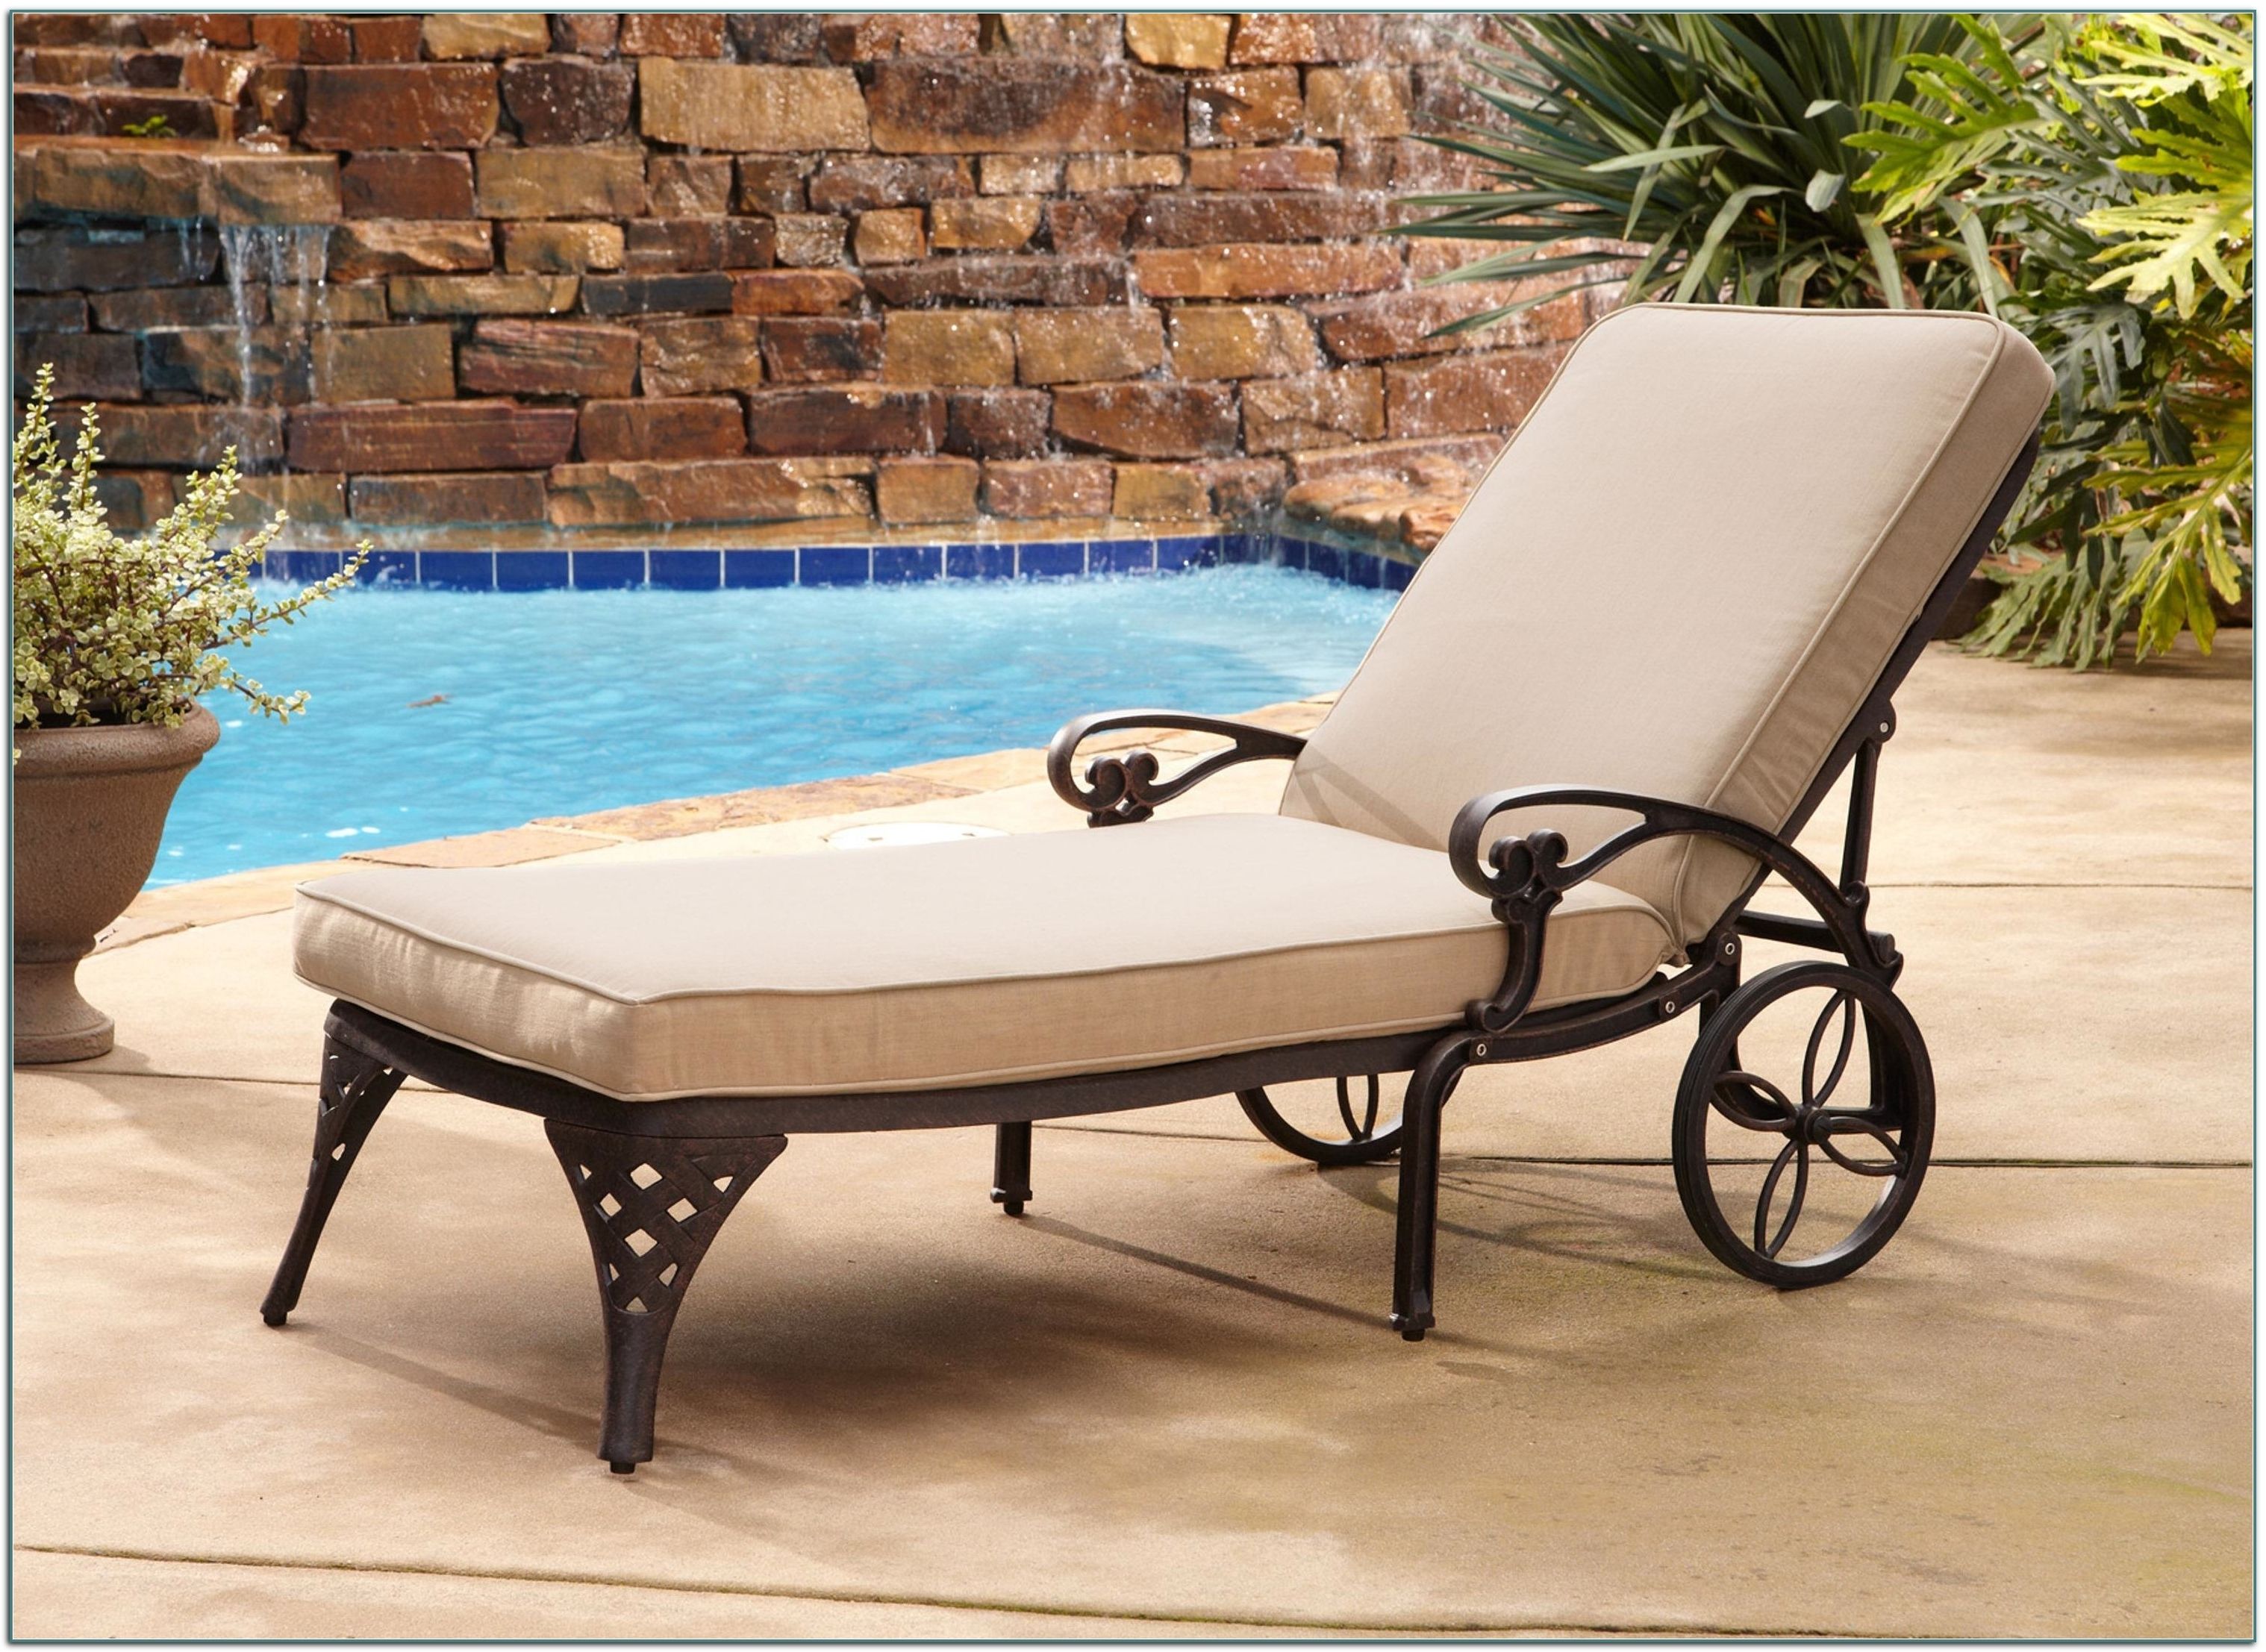 2018 Chaise Lounge Chairs Outdoor Pool • Lounge Chairs Ideas Pertaining To Heavy Duty Outdoor Chaise Lounge Chairs (View 3 of 15)